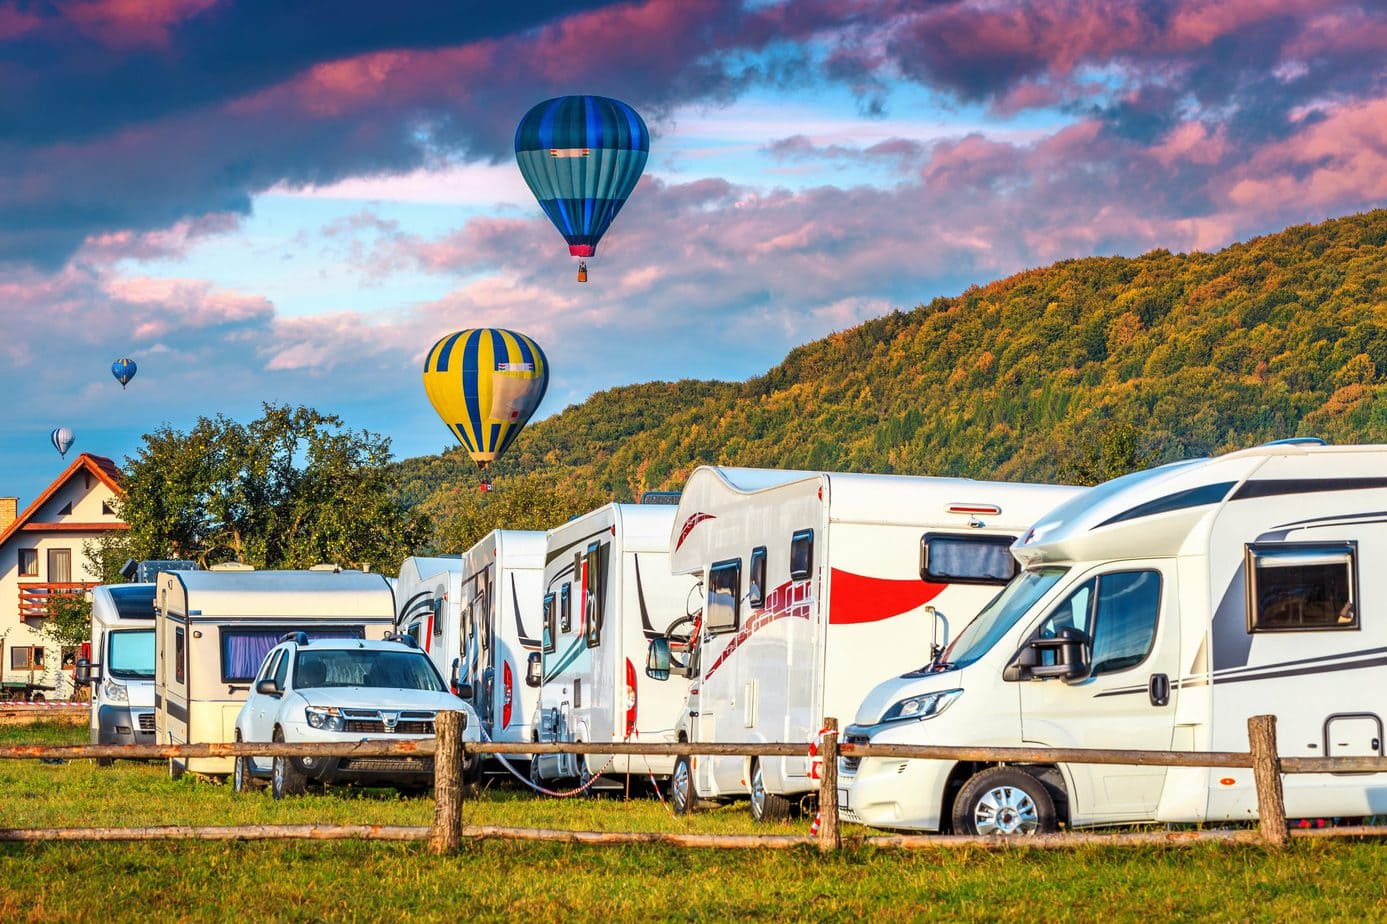 Caravanning and ballooning – the perfect combination for campers